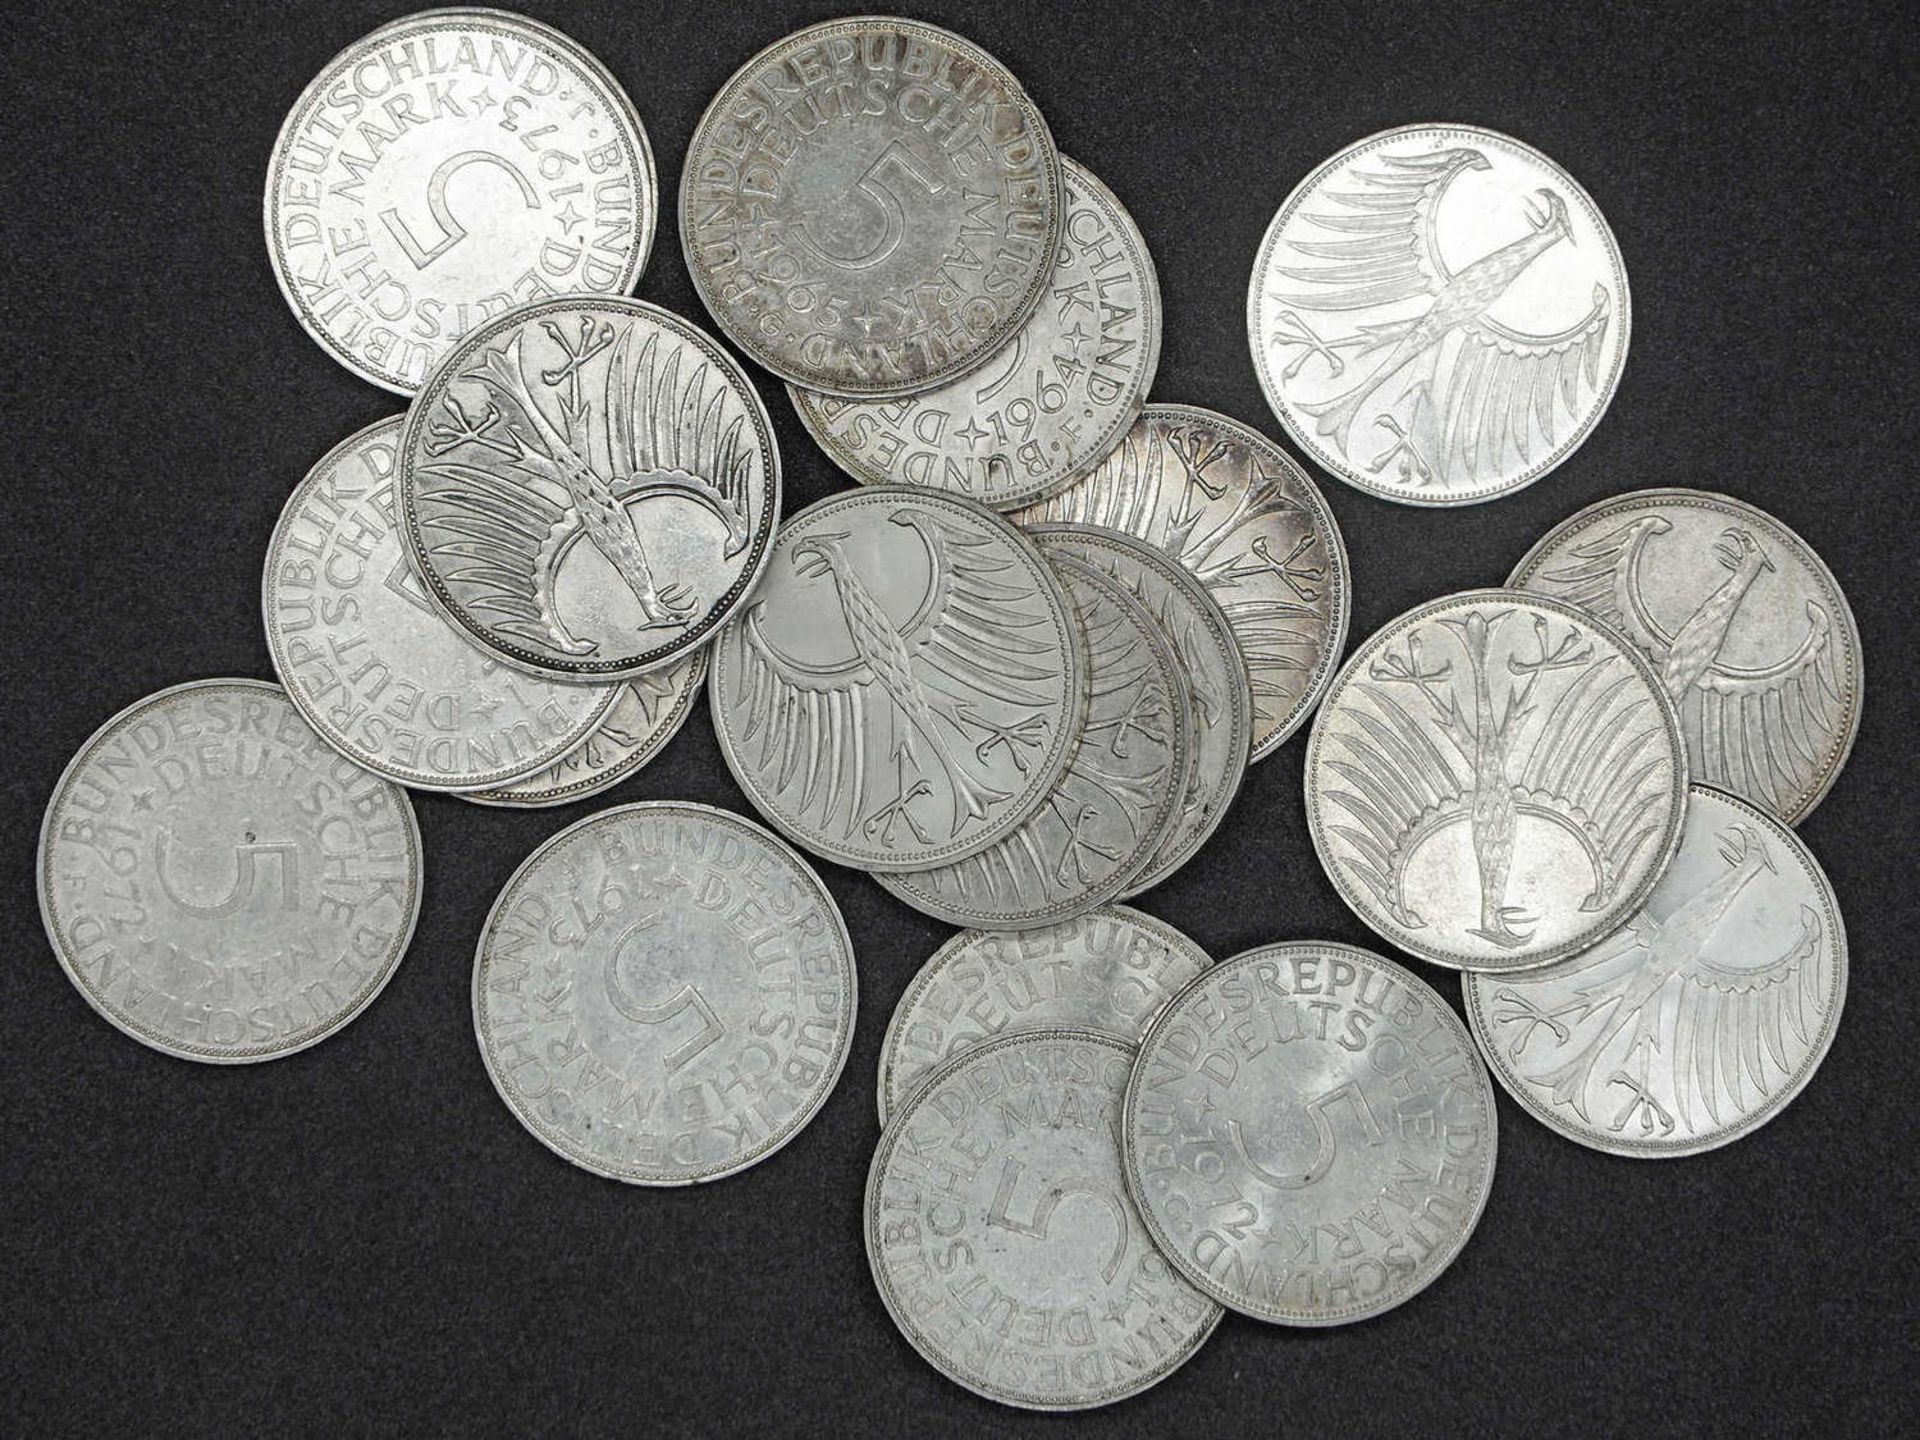 Germany, Lot 5.- DM - silver coins (silver eagle), different vintages. Mainly XF.